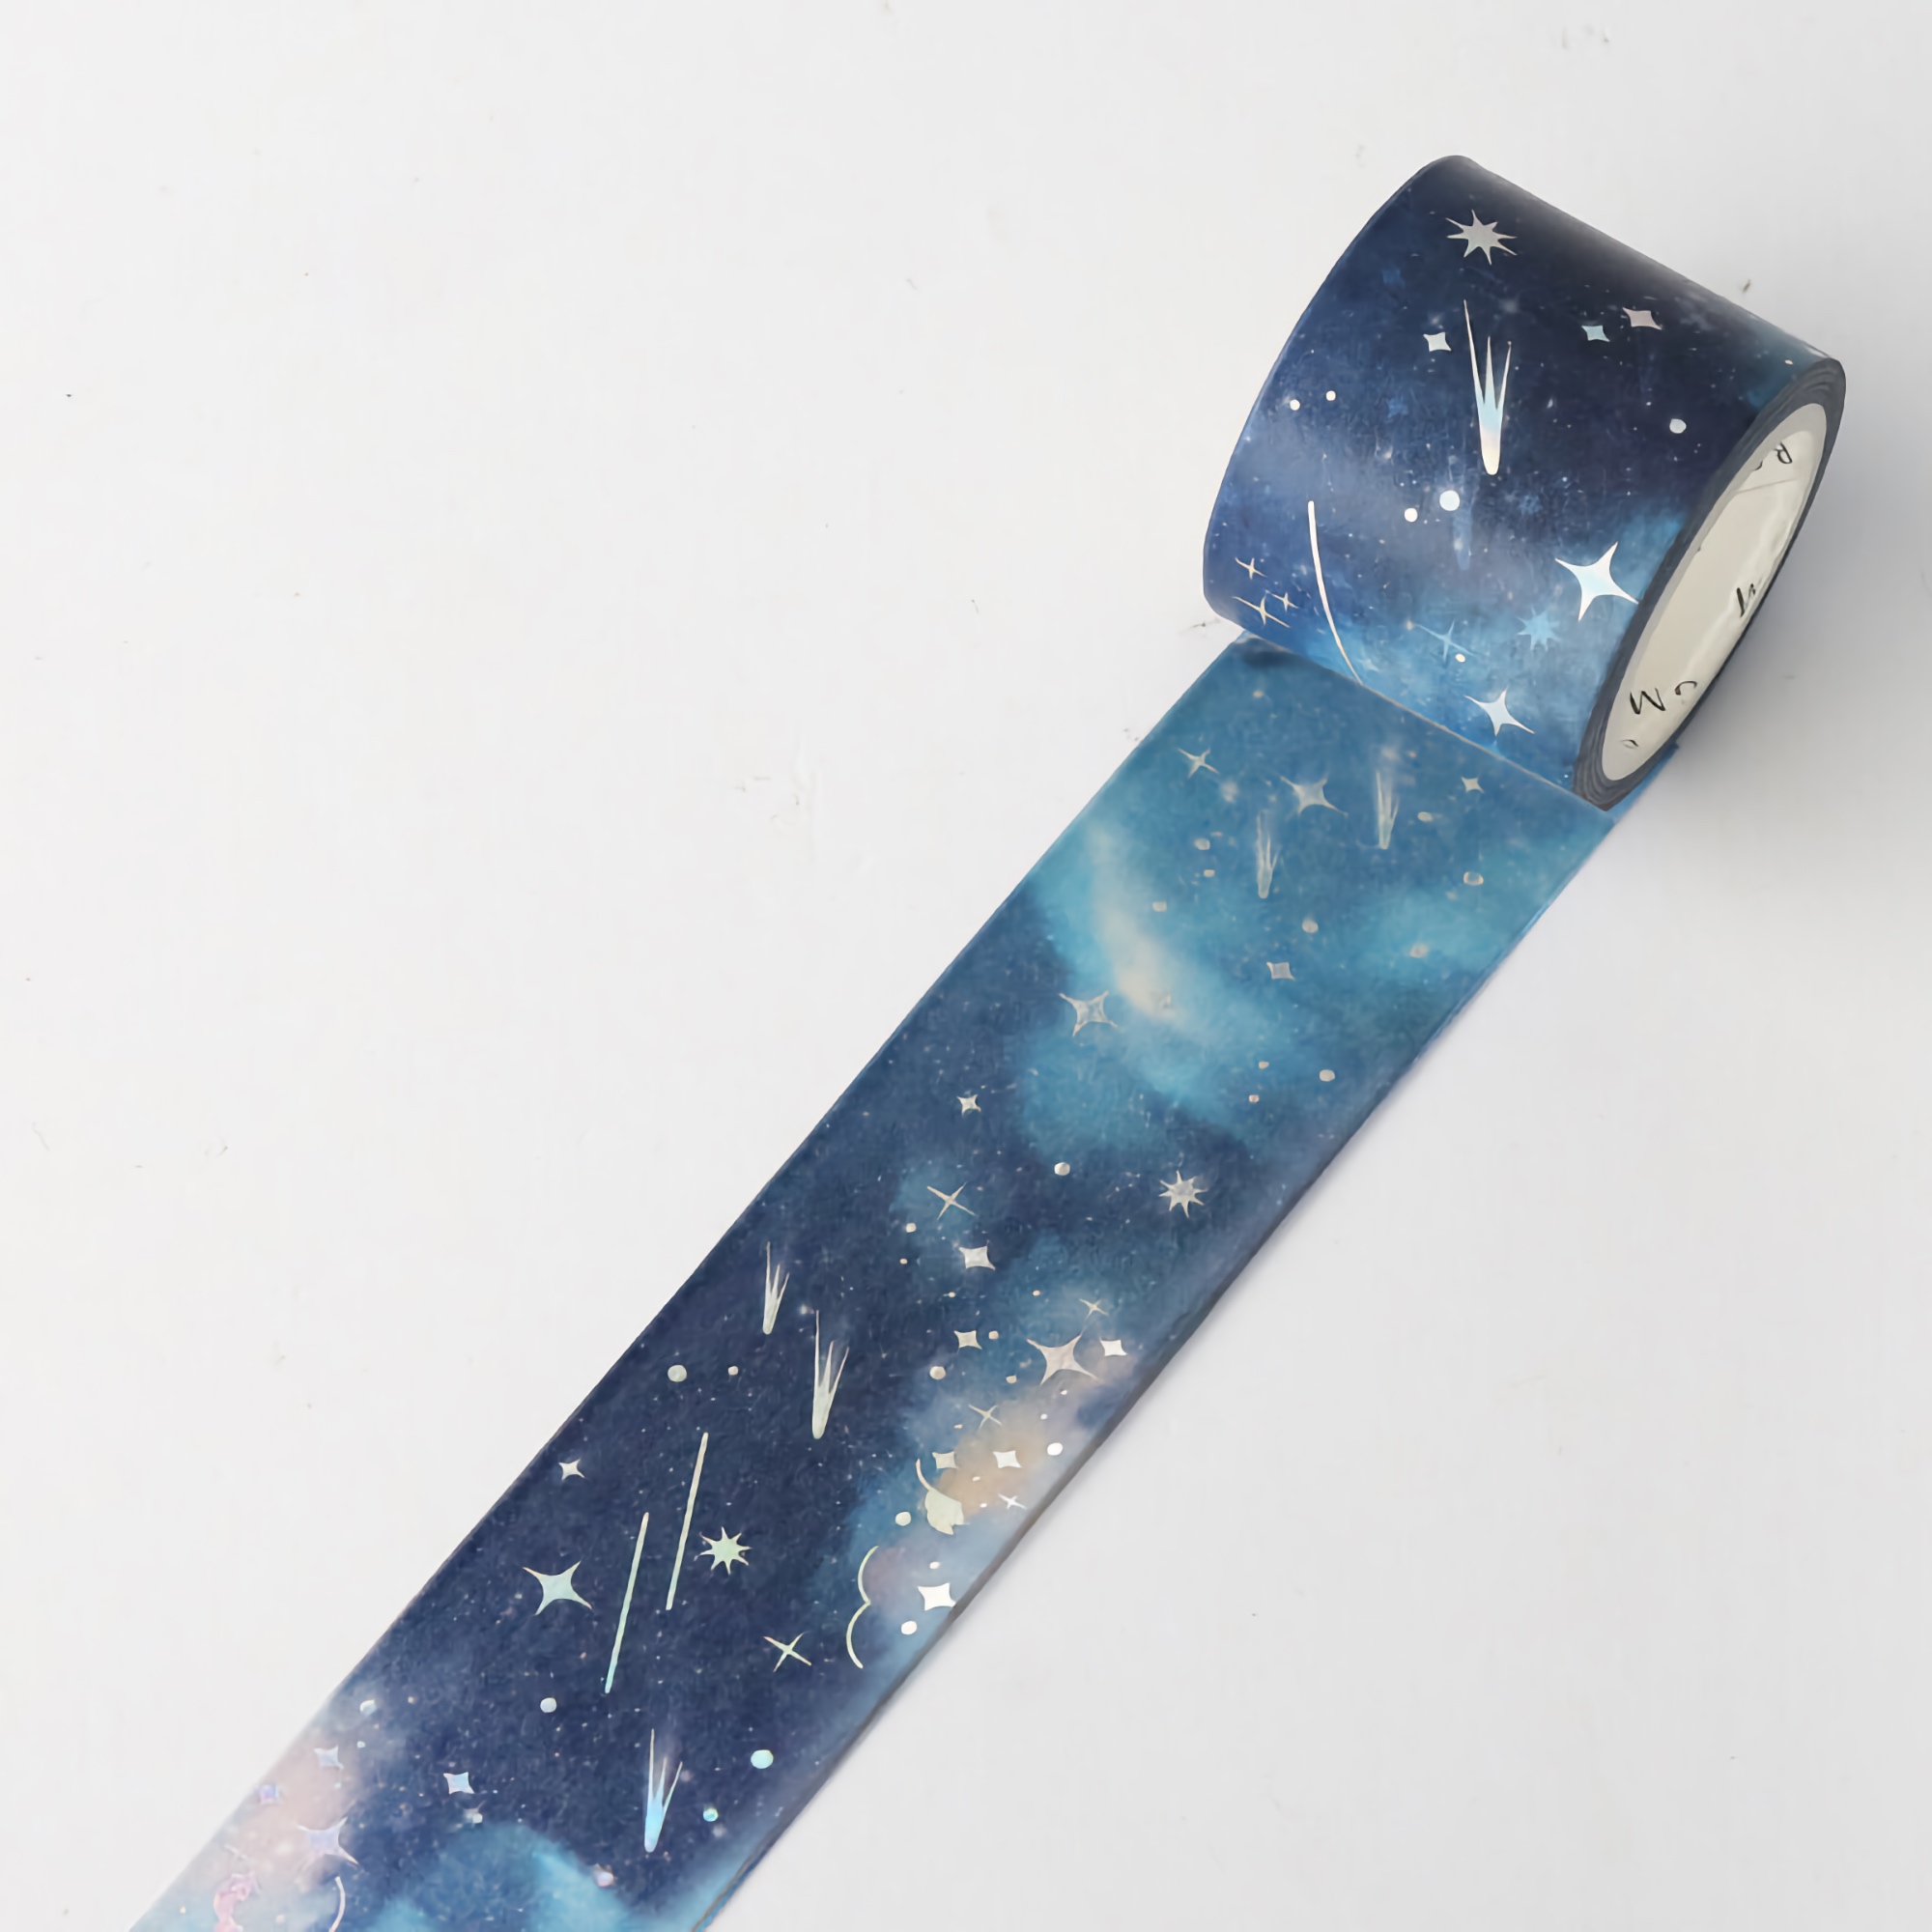 BGM Washi Tape Special Foil Space Galaxy 30 mm